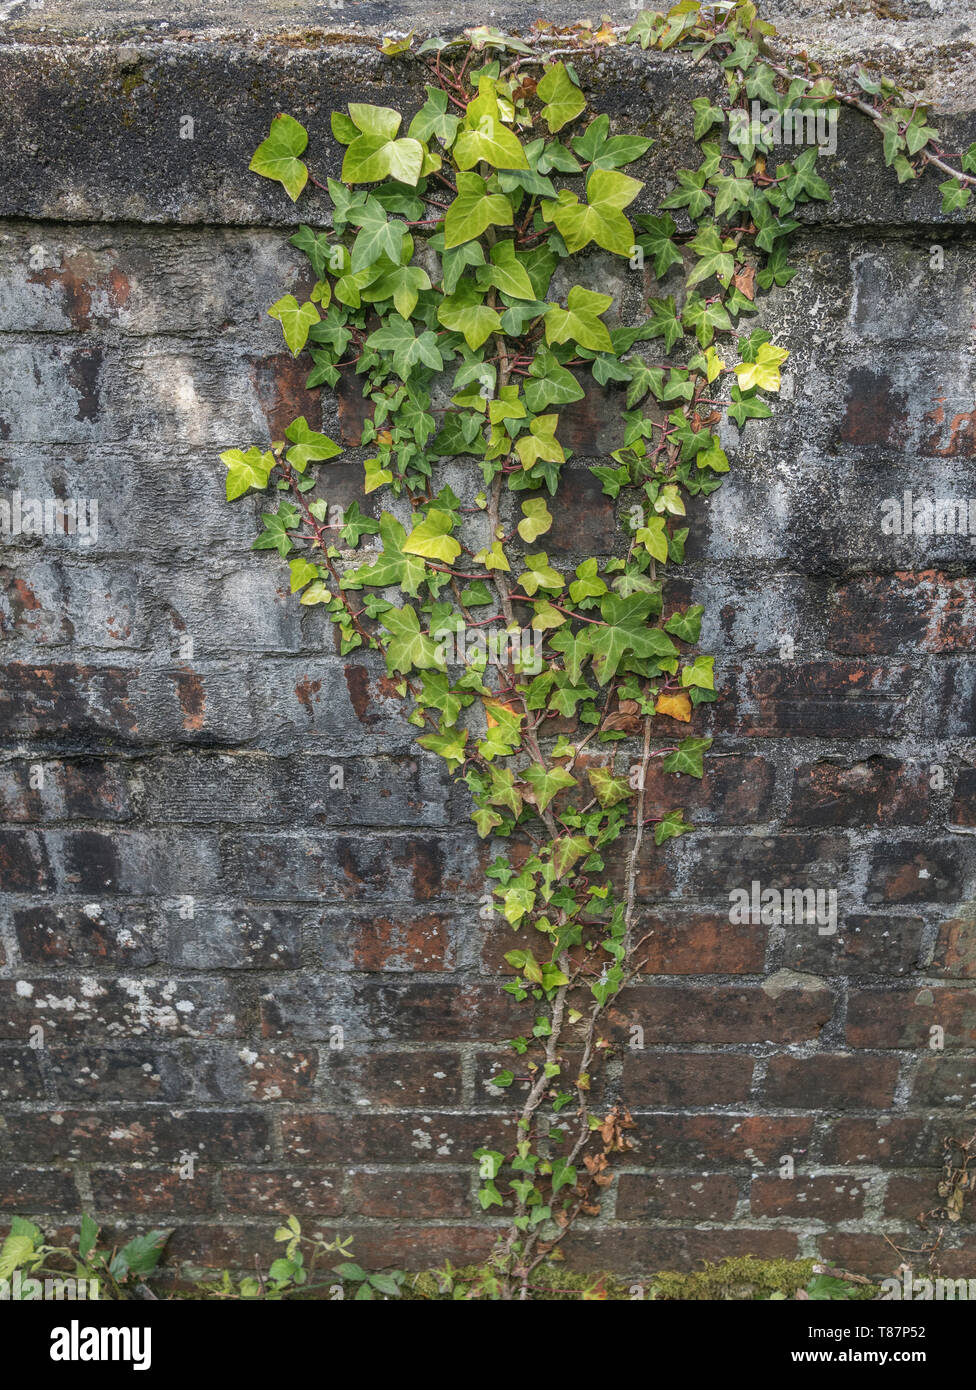 Climbing ivy / Common Ivy - Hedera helix - growing up the side of a brick wall. Concept creeping ivy. Ivy plant on wall. Stock Photo